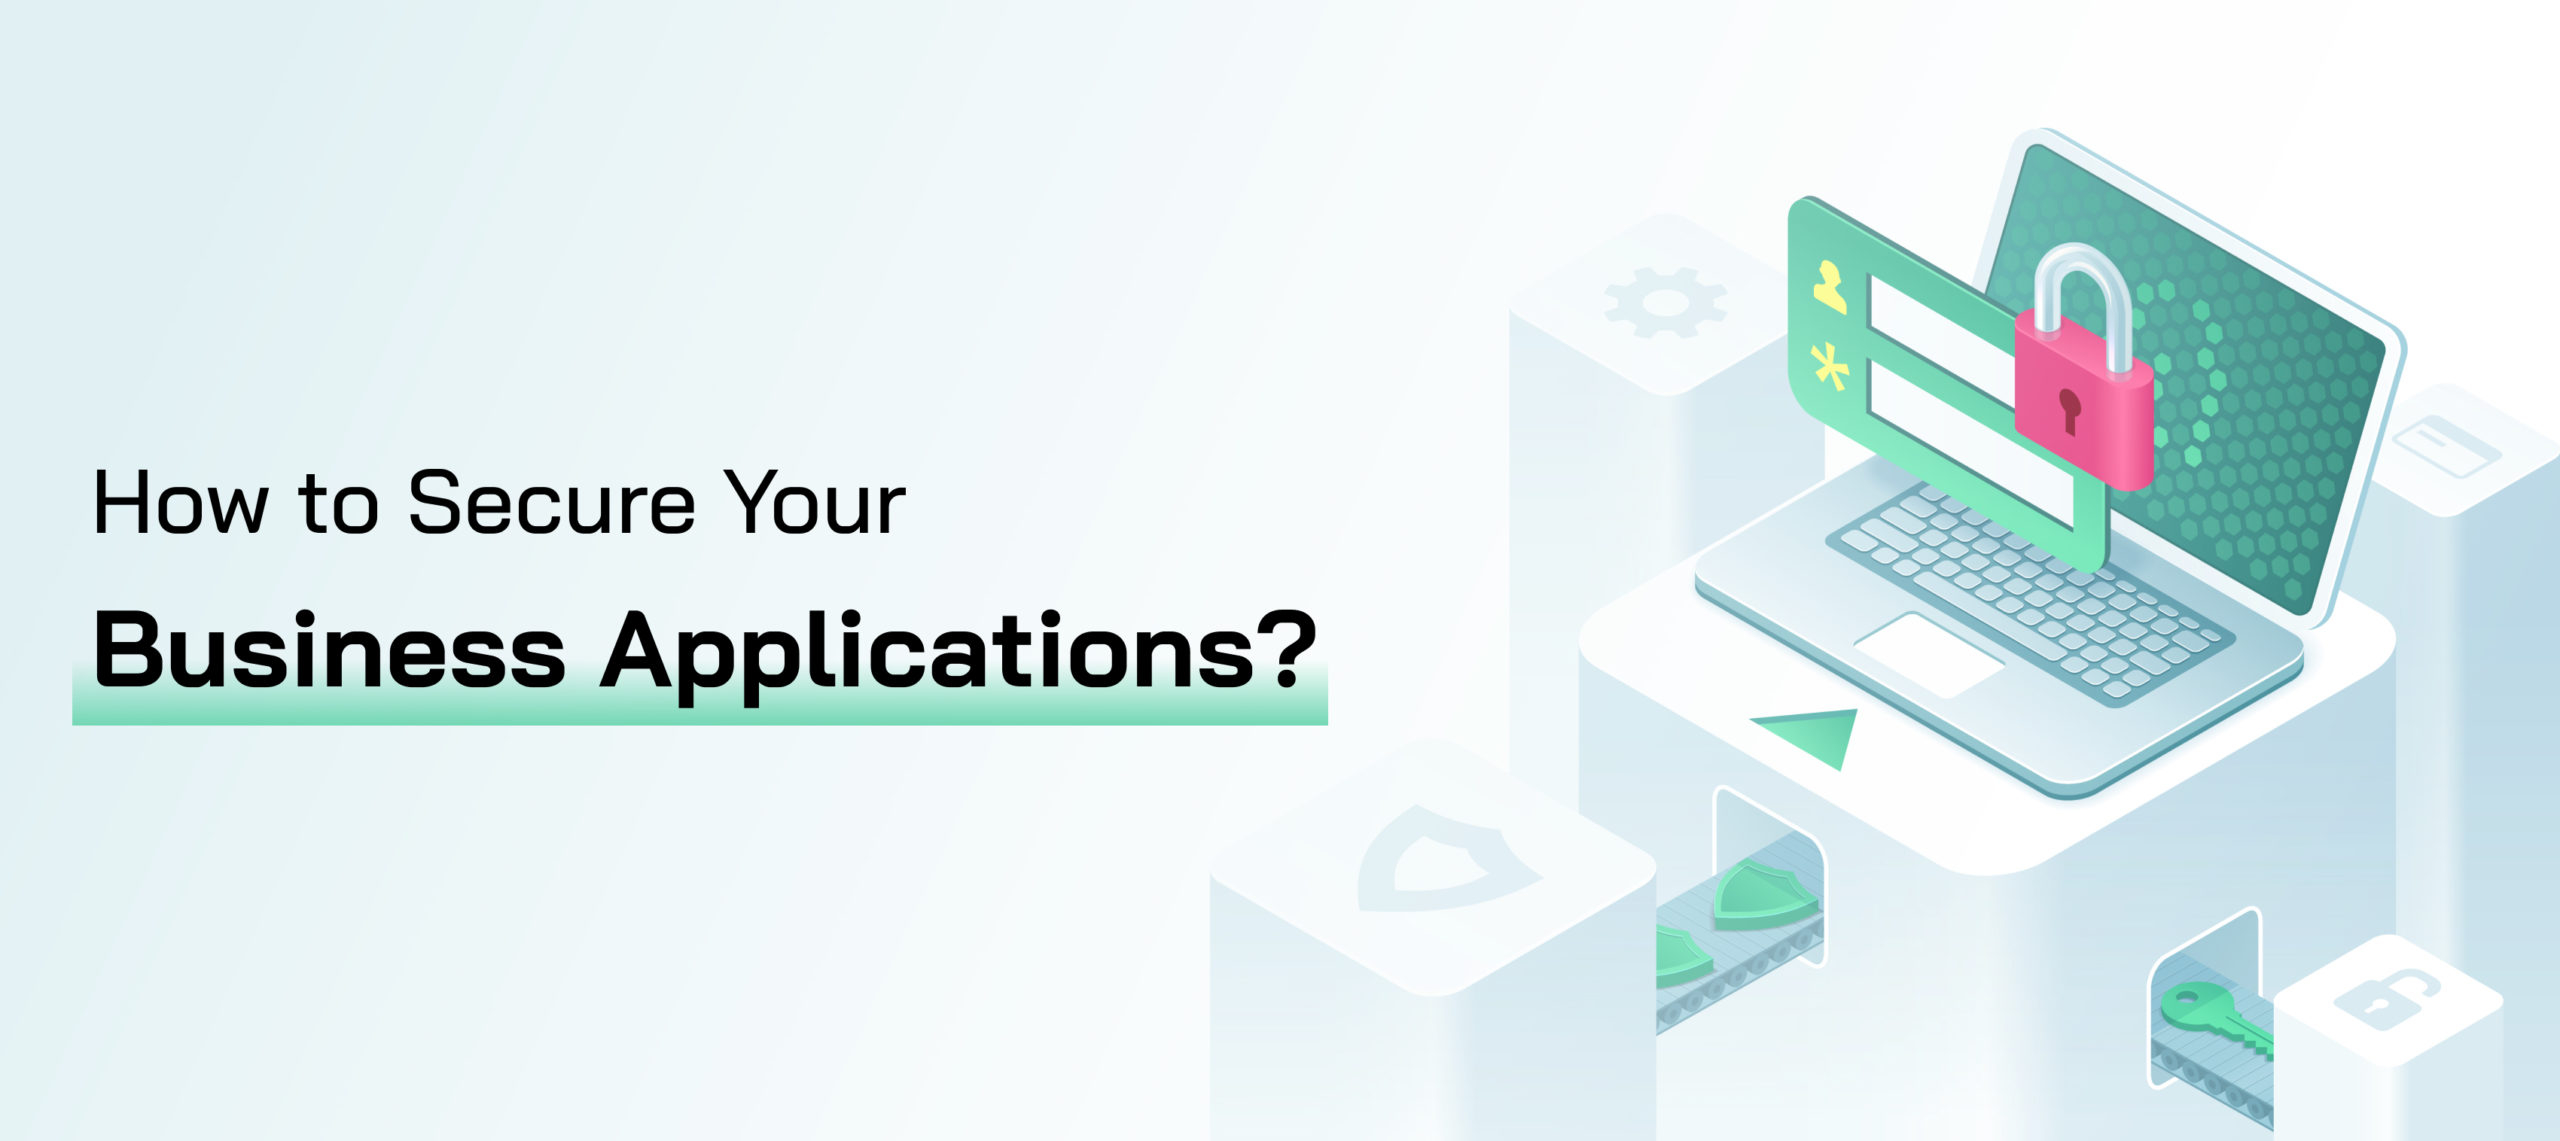  Application Security Audit Guide: How to Secure Your Business Applications